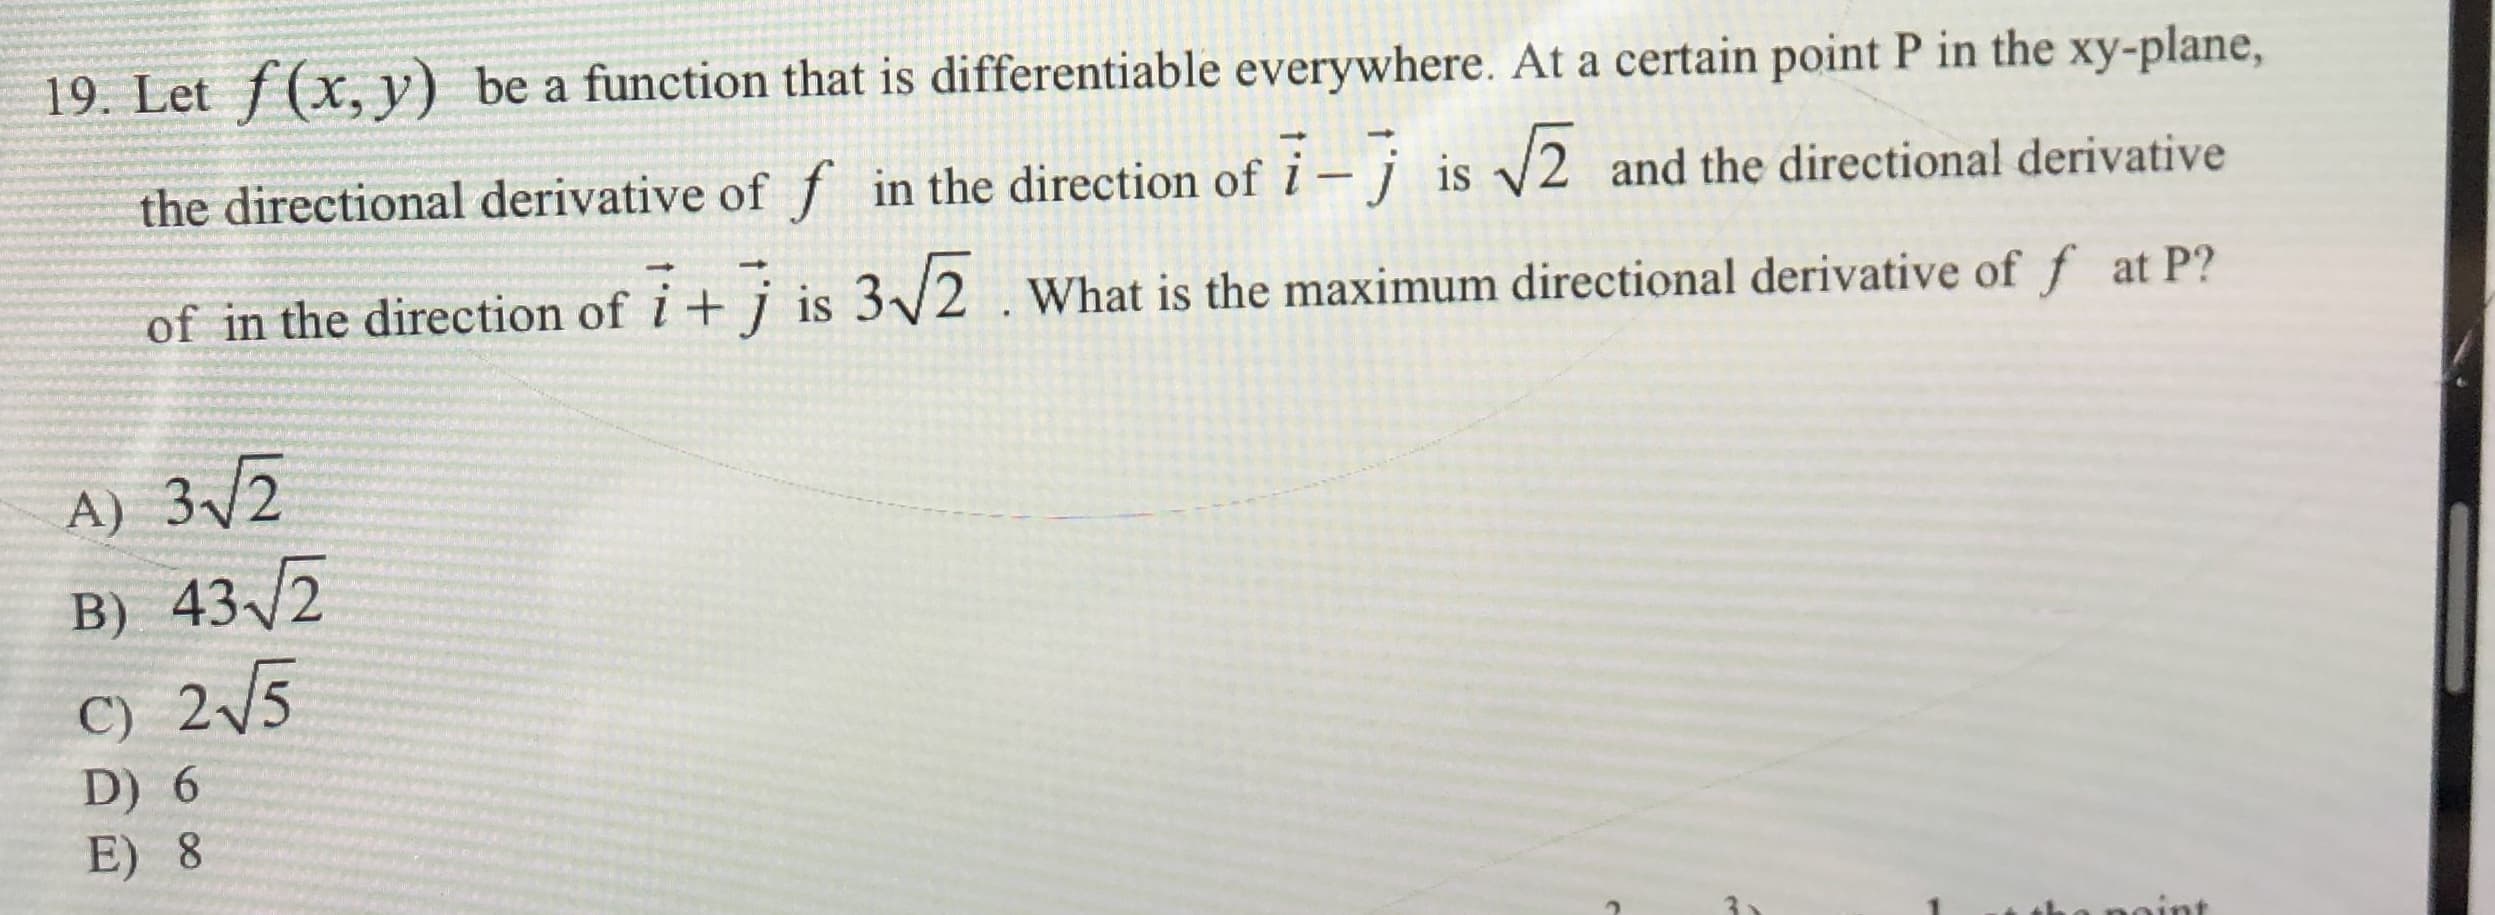 19. Let f(x, y) be a function that is differentiable everywhere. At a certain point P in the xy-plane,
the directional derivative of f in the direction of
7-7 is 2
and the directional derivative
7+7
i+ is 3/2
of in the direction of
What is the maximum directional derivative of f at P?
A) 32
B) 432
C) 25
D) 6
E) 8
